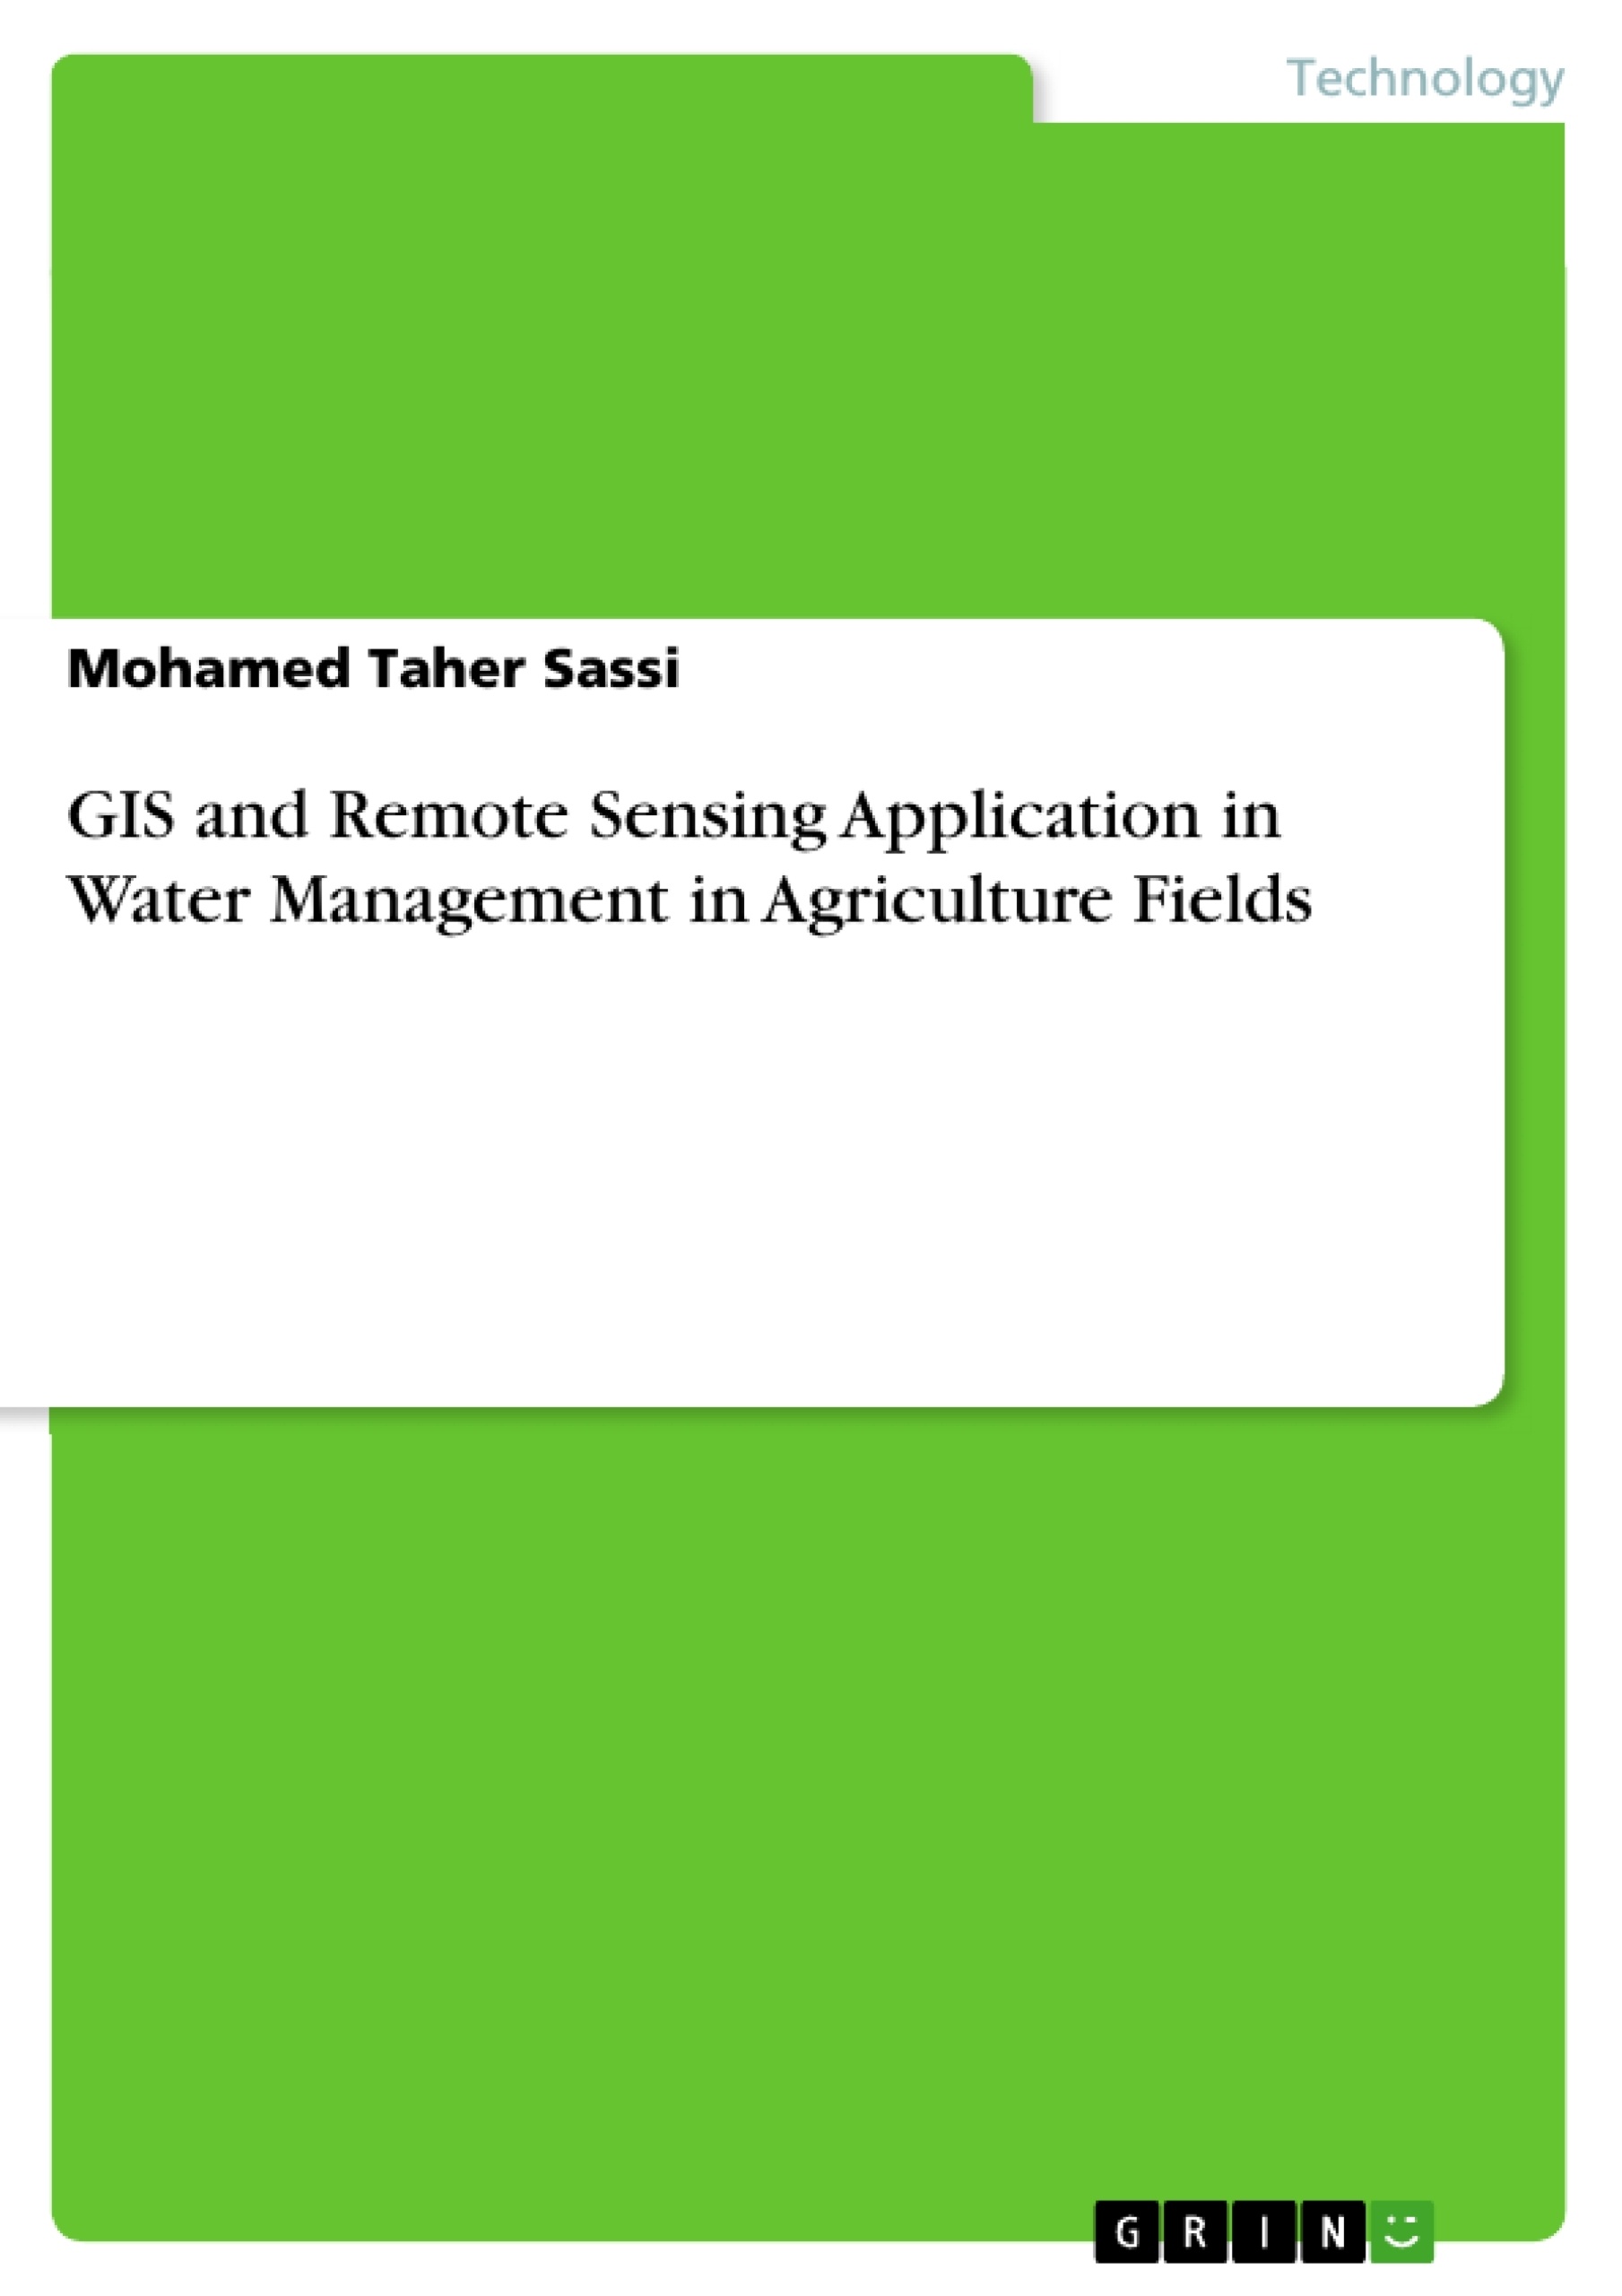 Título: GIS and Remote Sensing Application in Water Management in Agriculture Fields